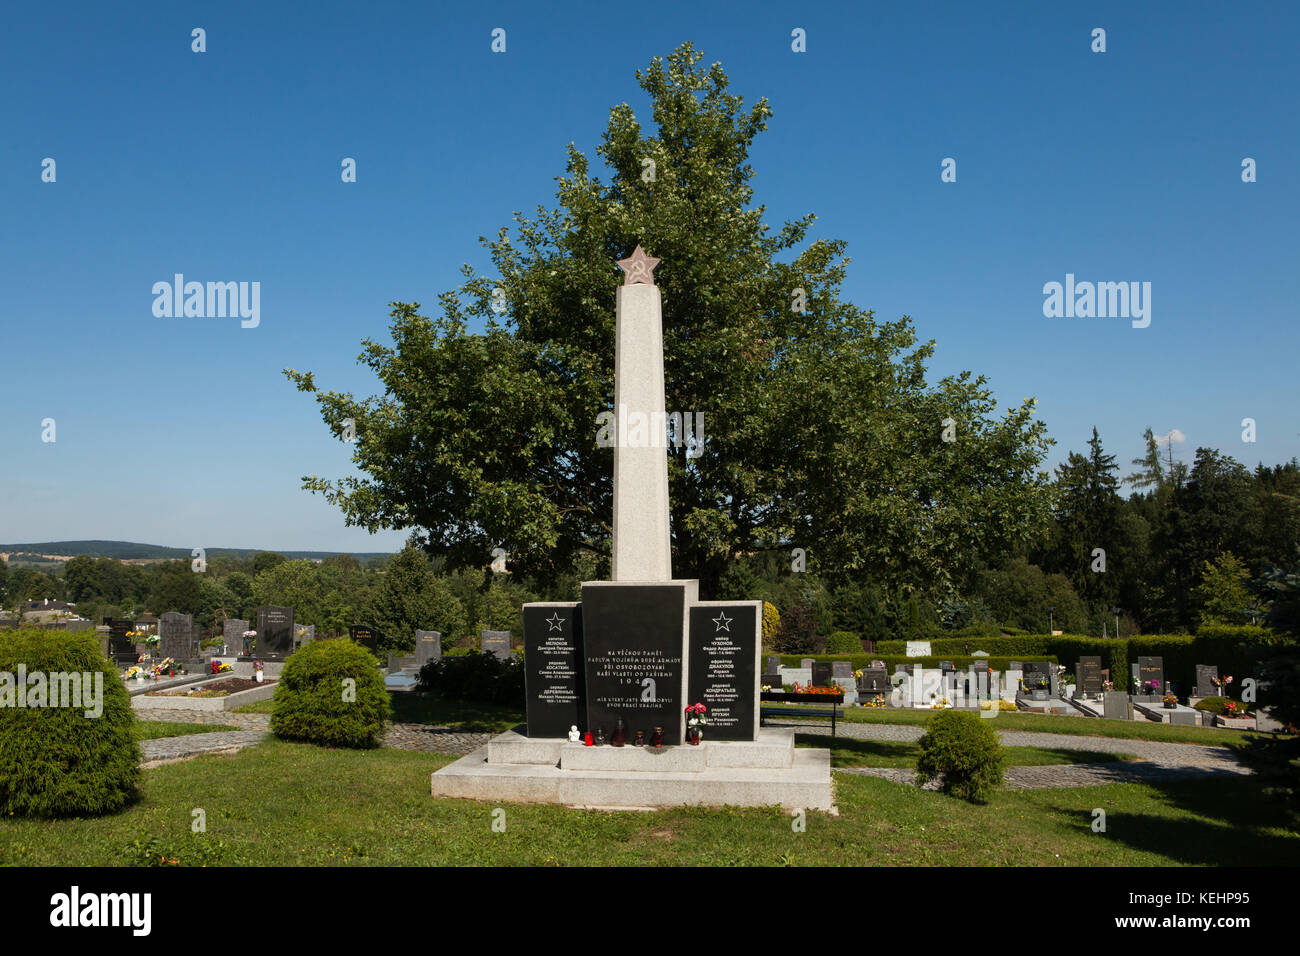 Soviet War Memorial at the town cemetery in Žďár nad Sázavou, Czech Republic. Red Army soldiers and military officers who died of wounds in May and June 1945 just after World War II are buried here. Stock Photo